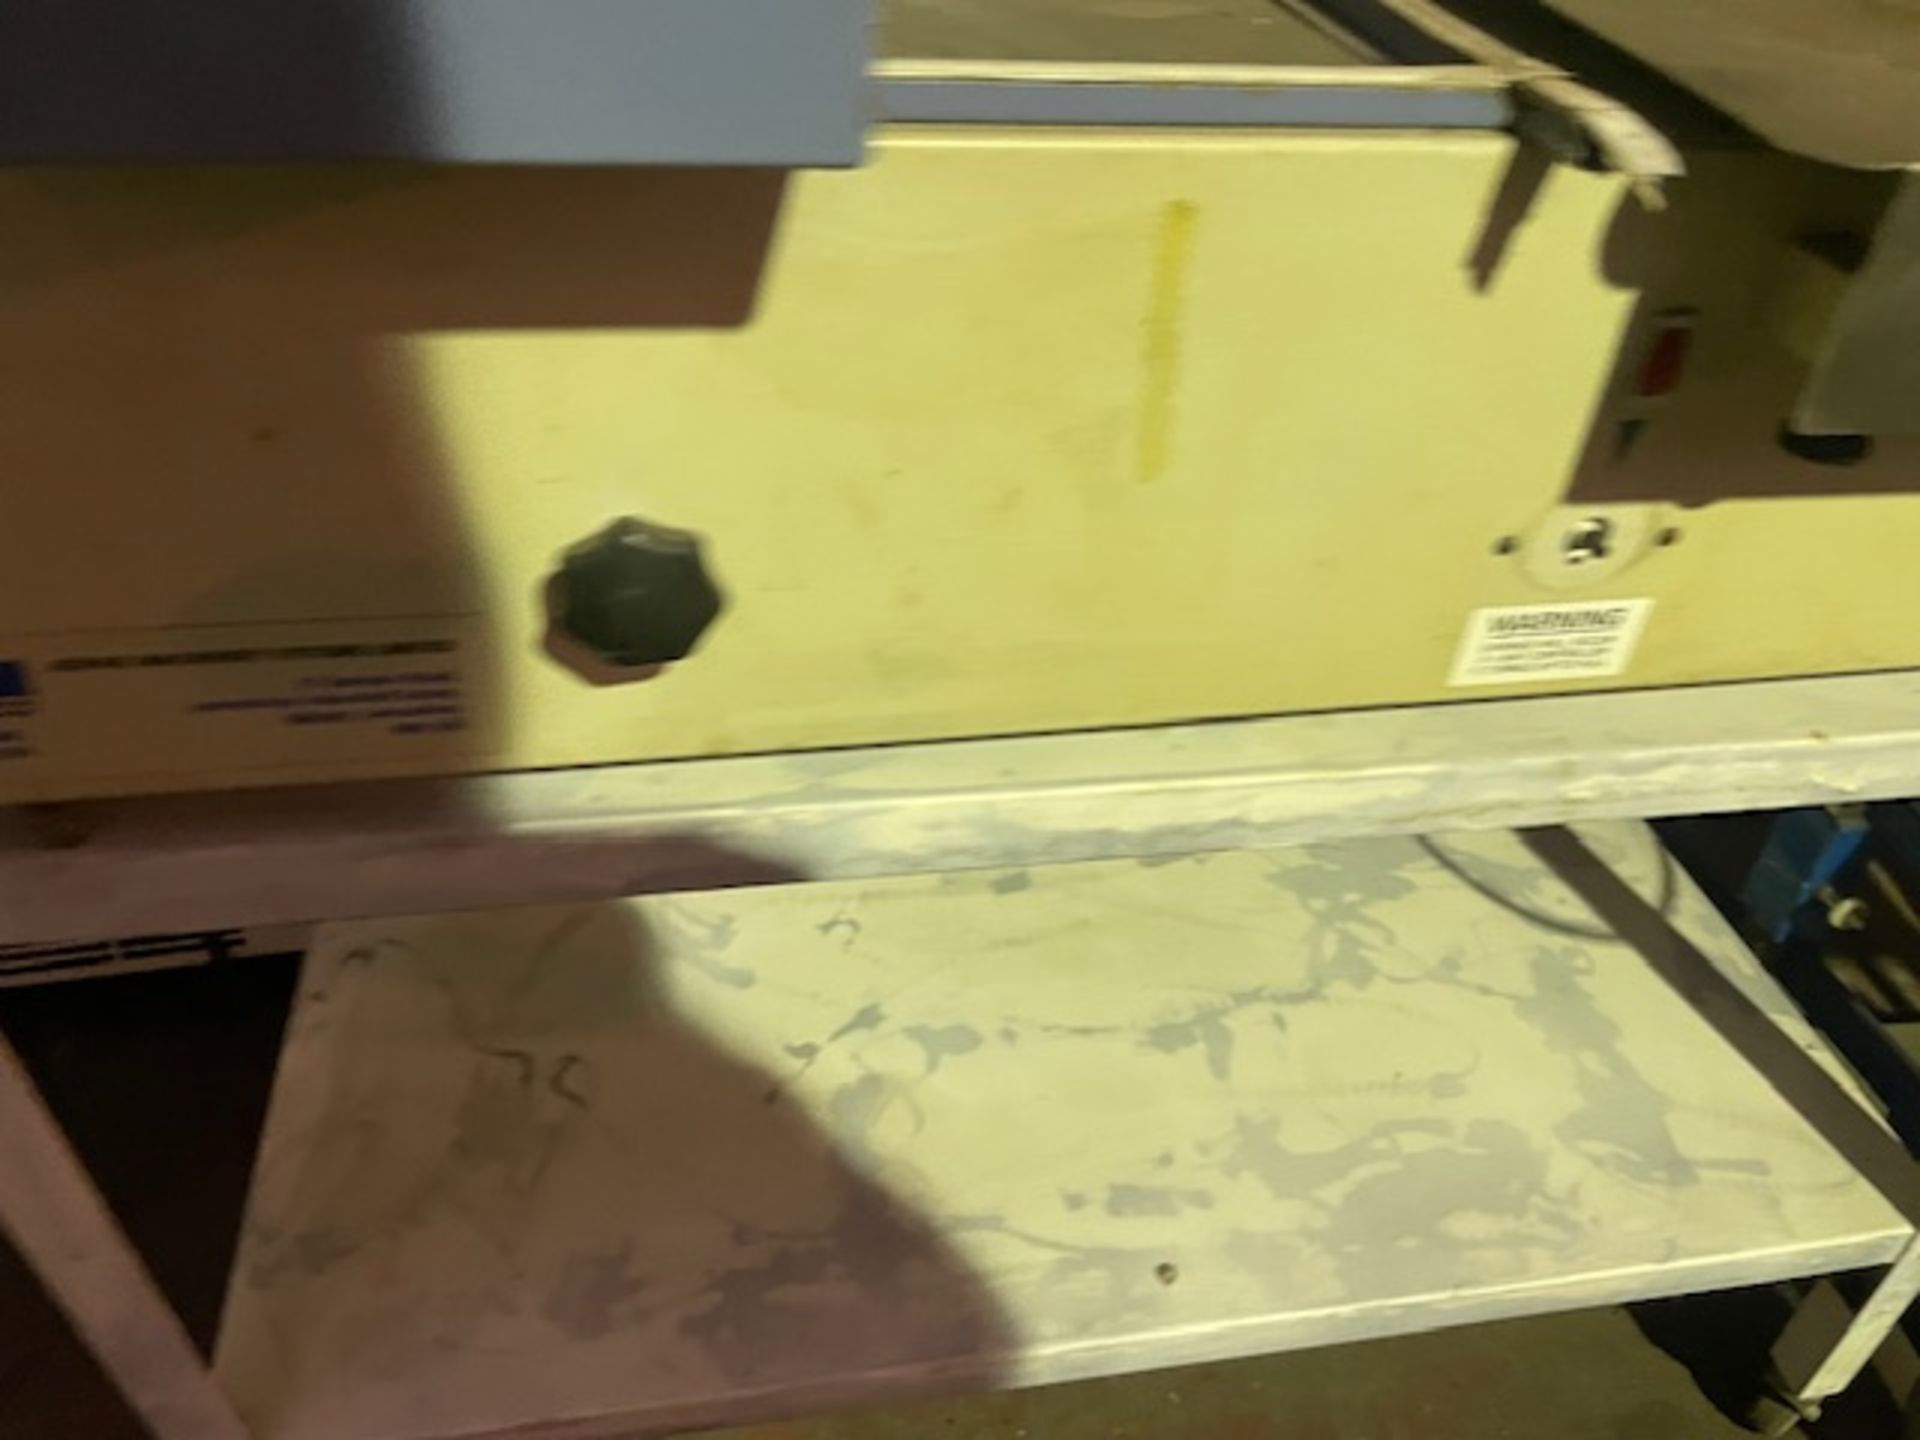 Heat sealing machine for sealing bags along with elevator for moving package on has been sat around - Image 6 of 6